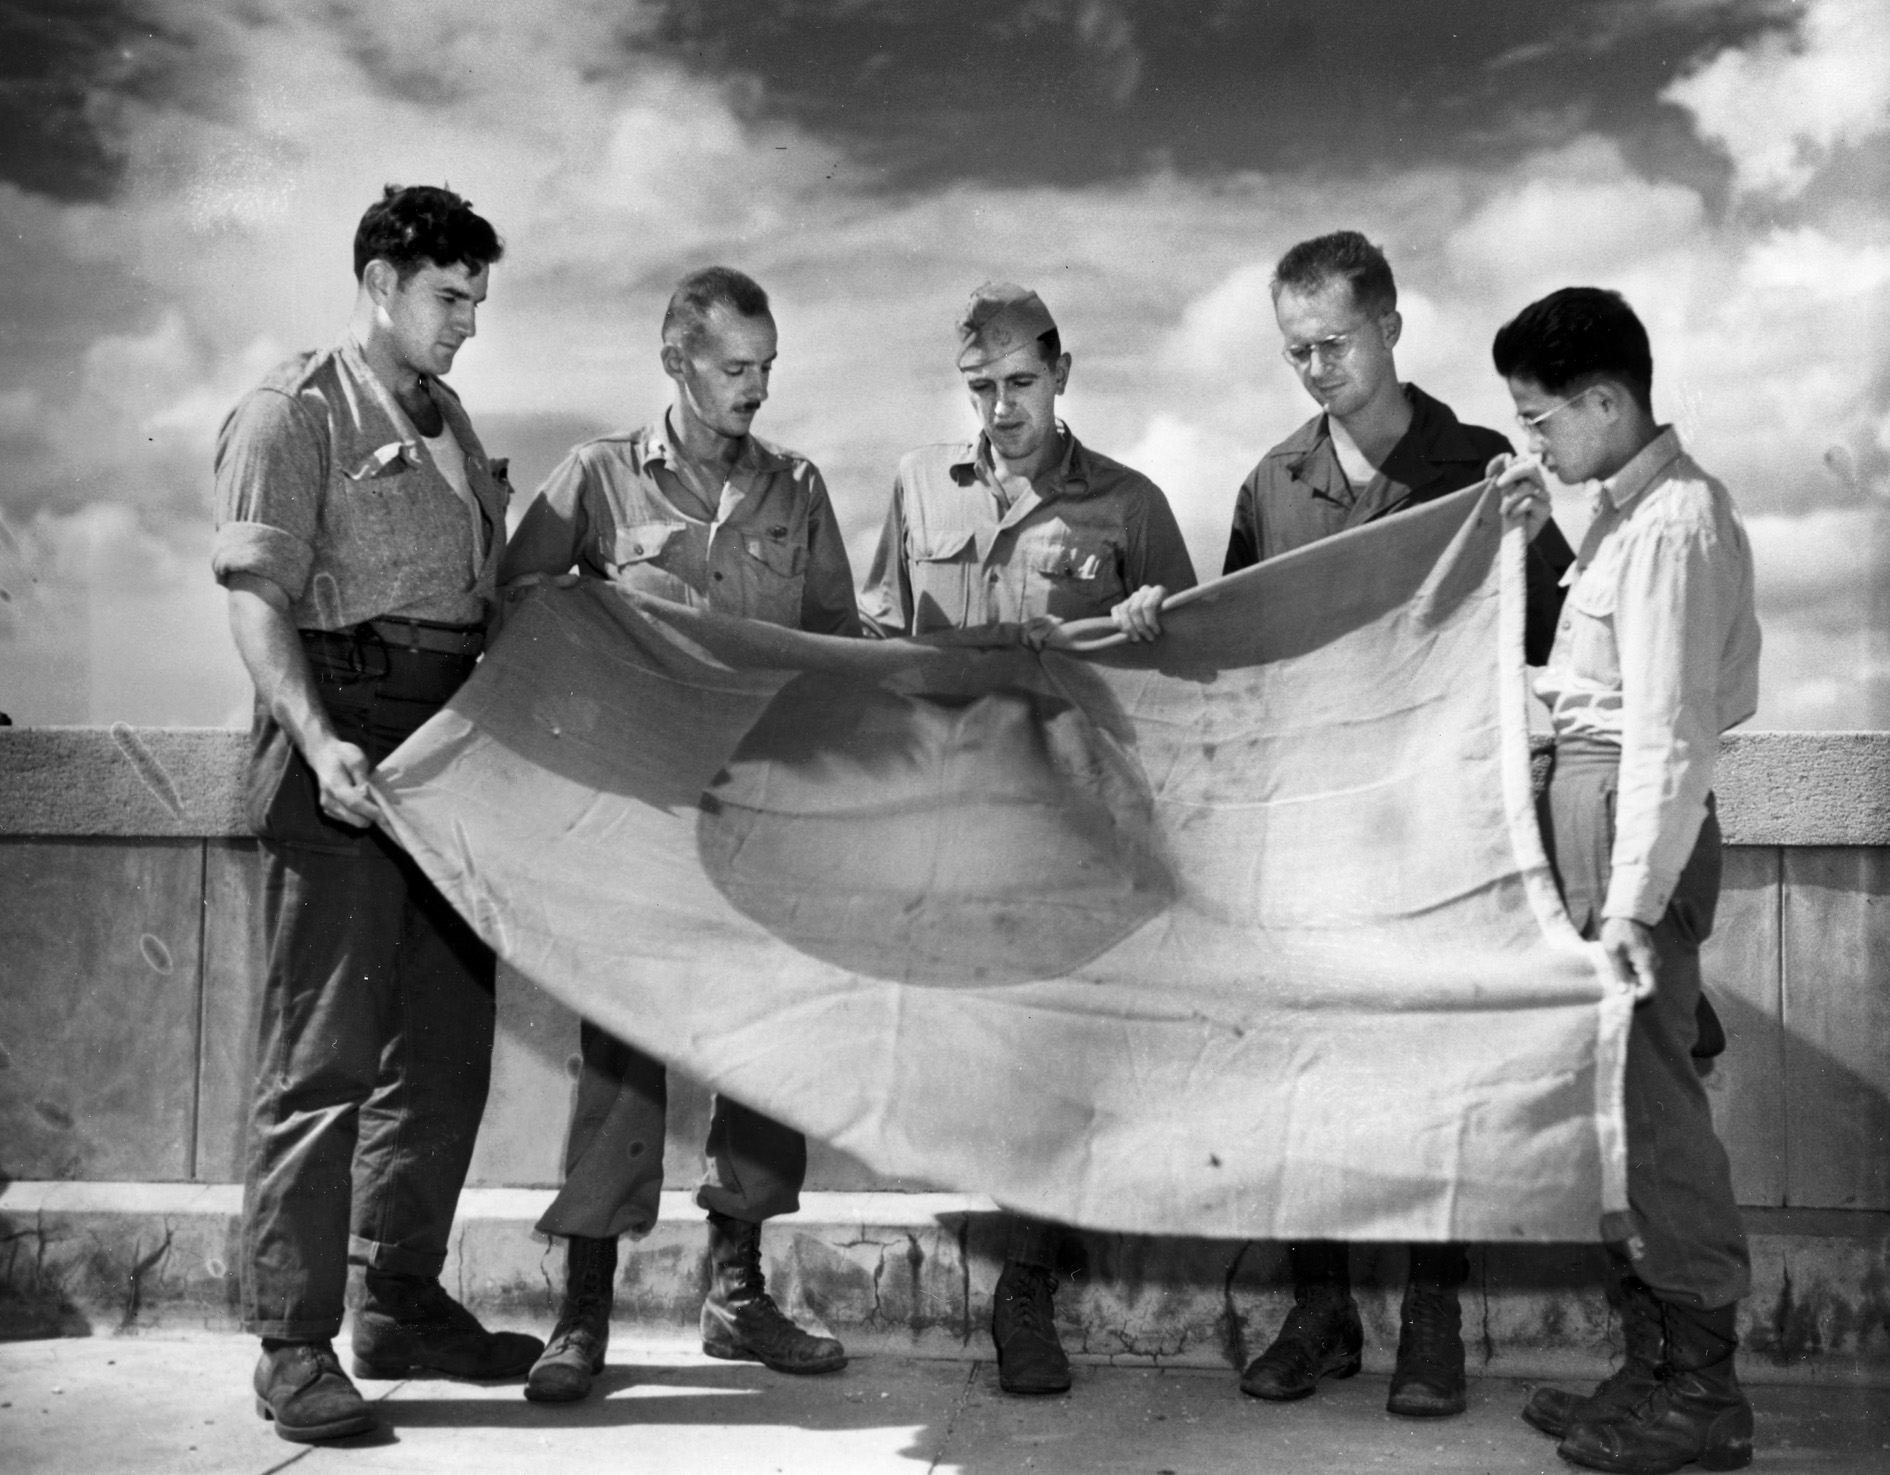 Members of the “Cardinal Team”—a group charged with rescuing POWs held in China—pose with a Japanese flag. Sergeant Hal Leith is second from right.